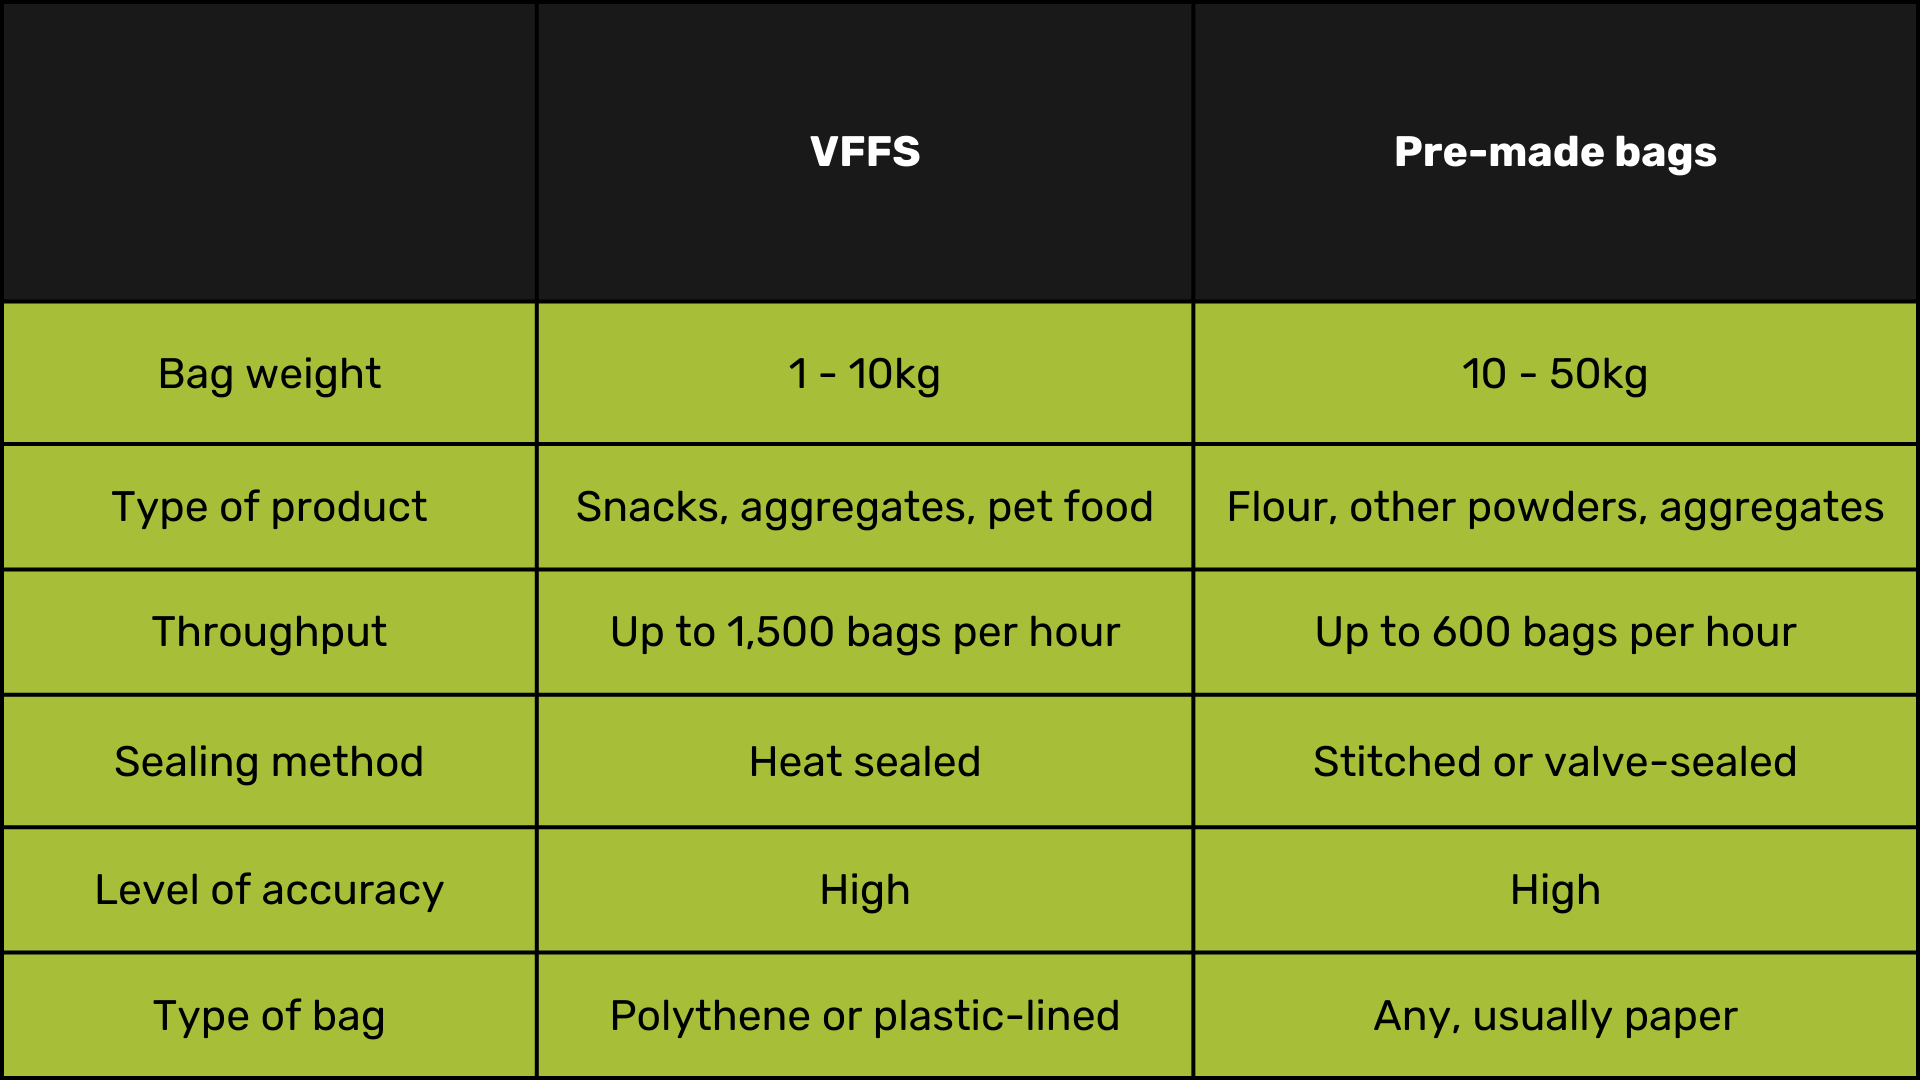 Table showing the comparison of VFFS vs pre-made bags